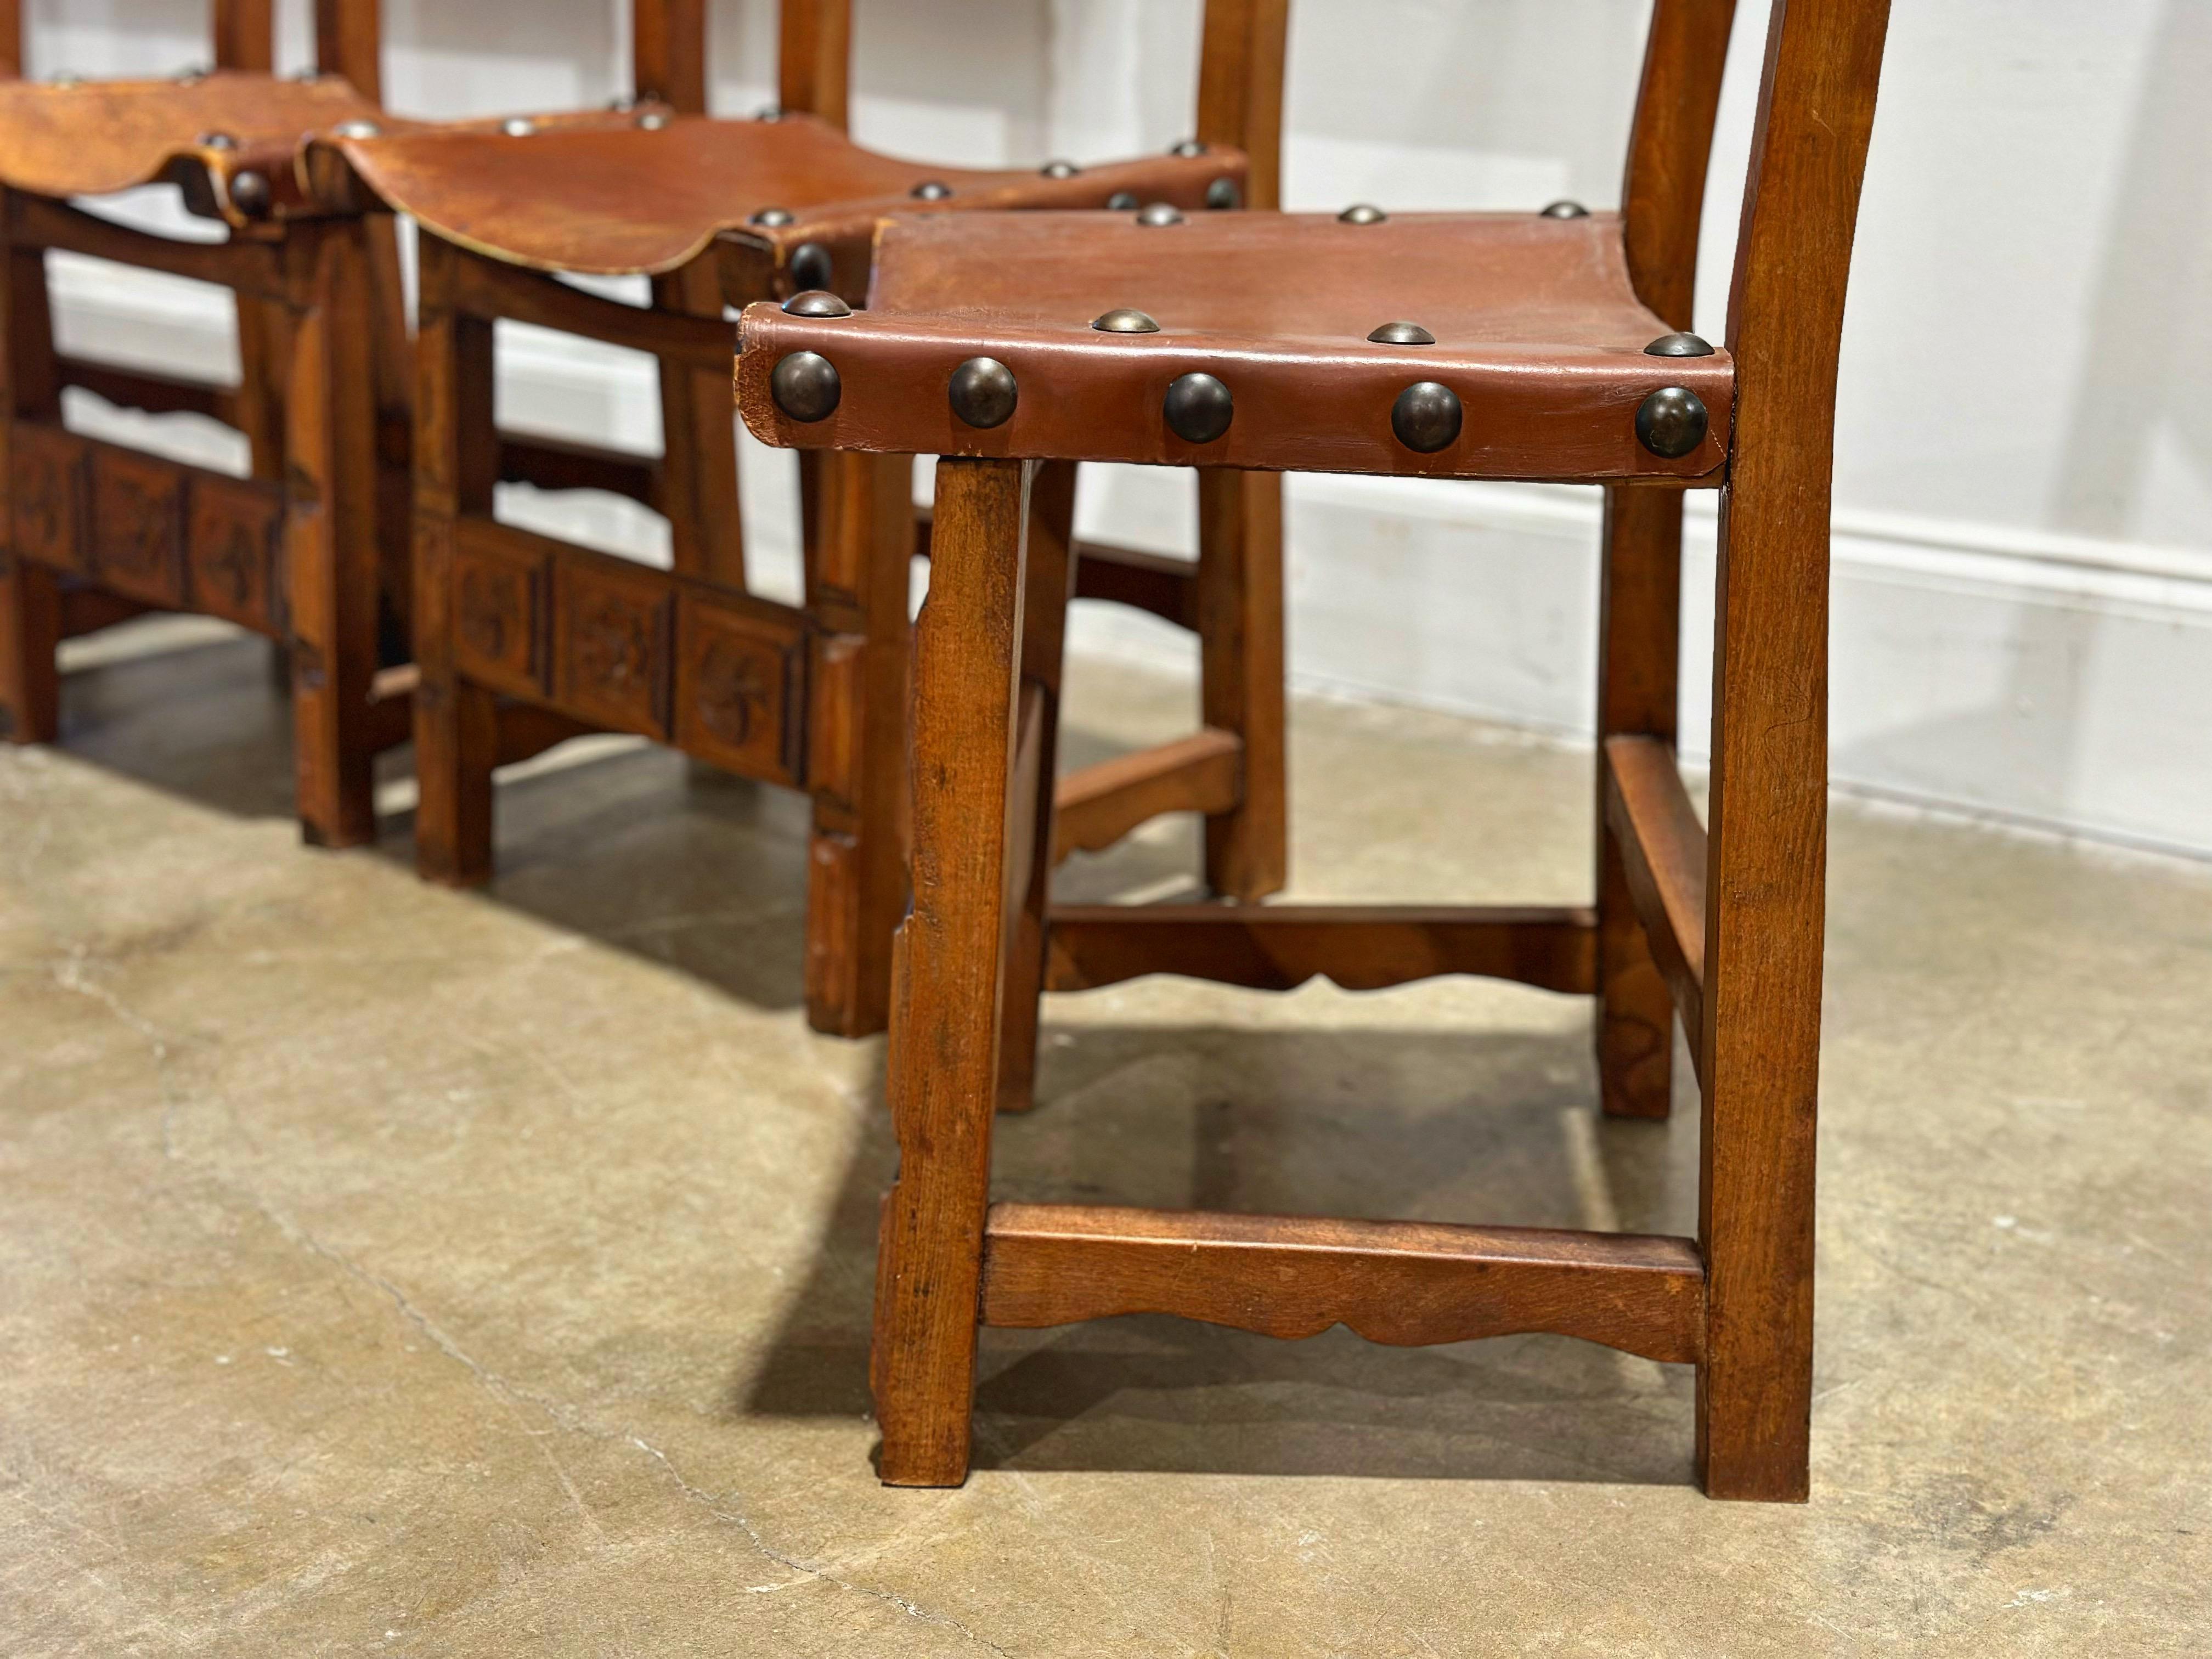 Vintage Spainish Revival Carved Oak + Leather Dining Chairs - Set of Six For Sale 5